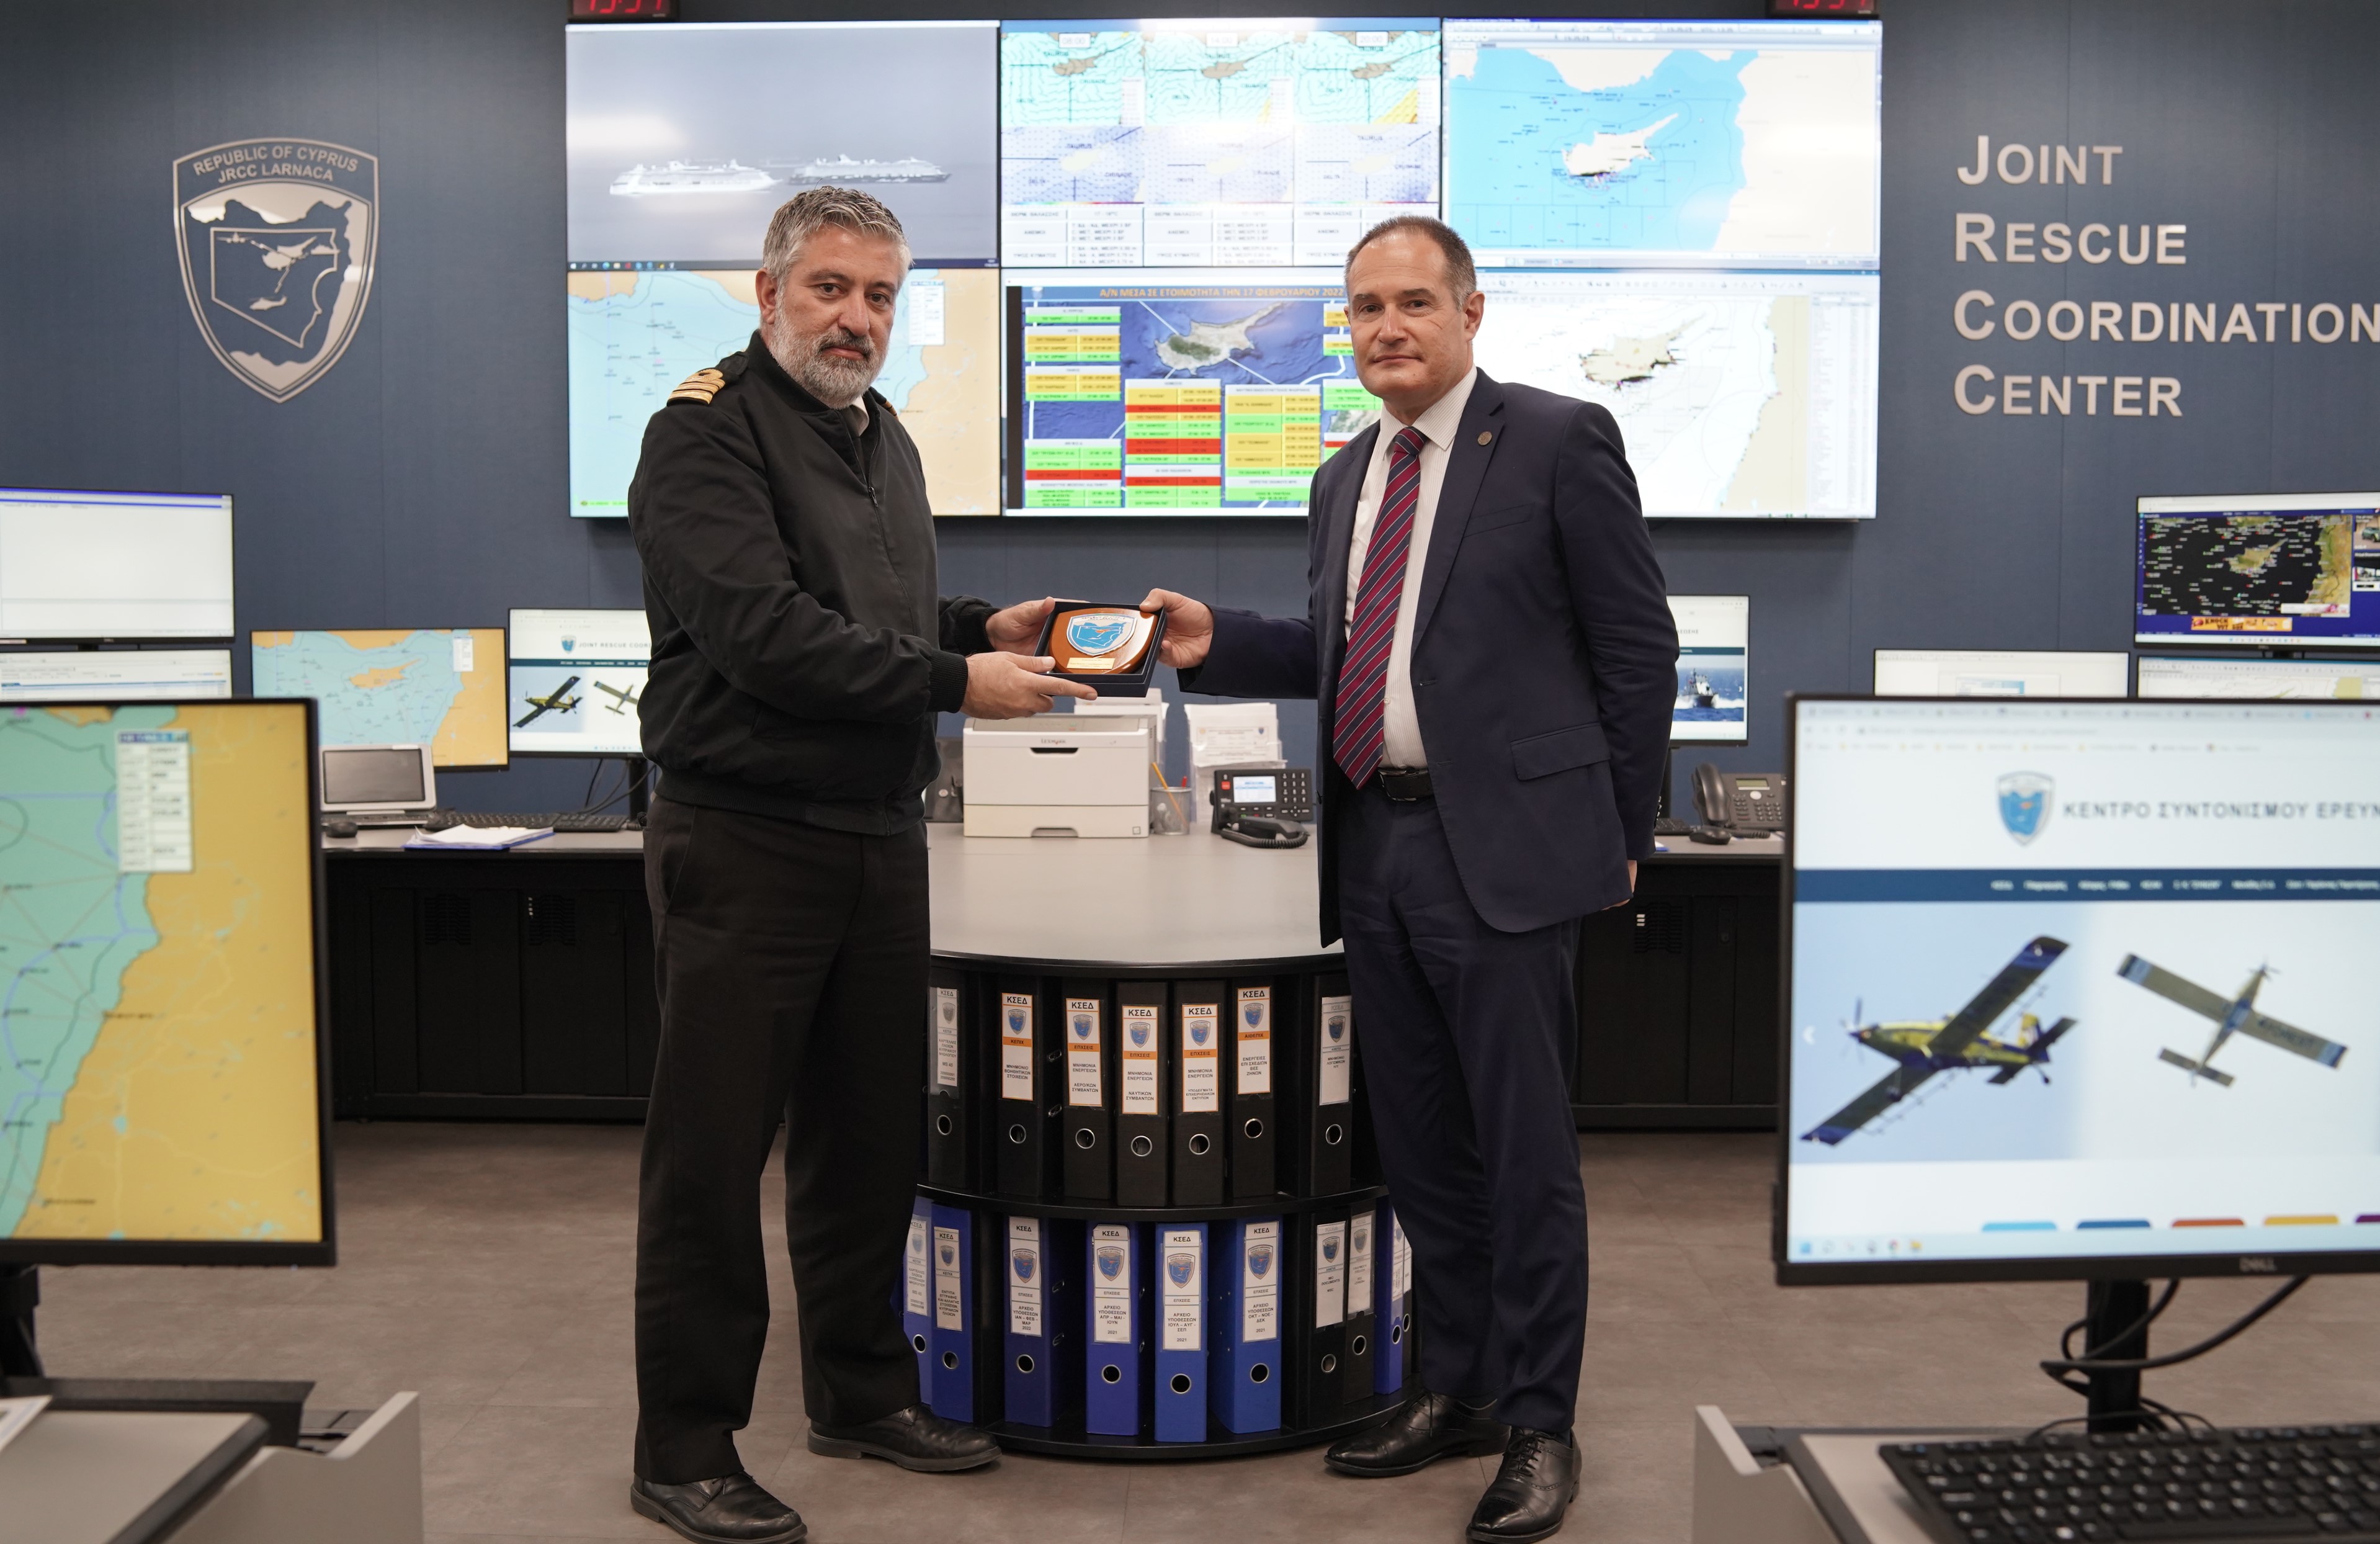 Visit of the Executive Director of the FRONTEX Agency to JRCC